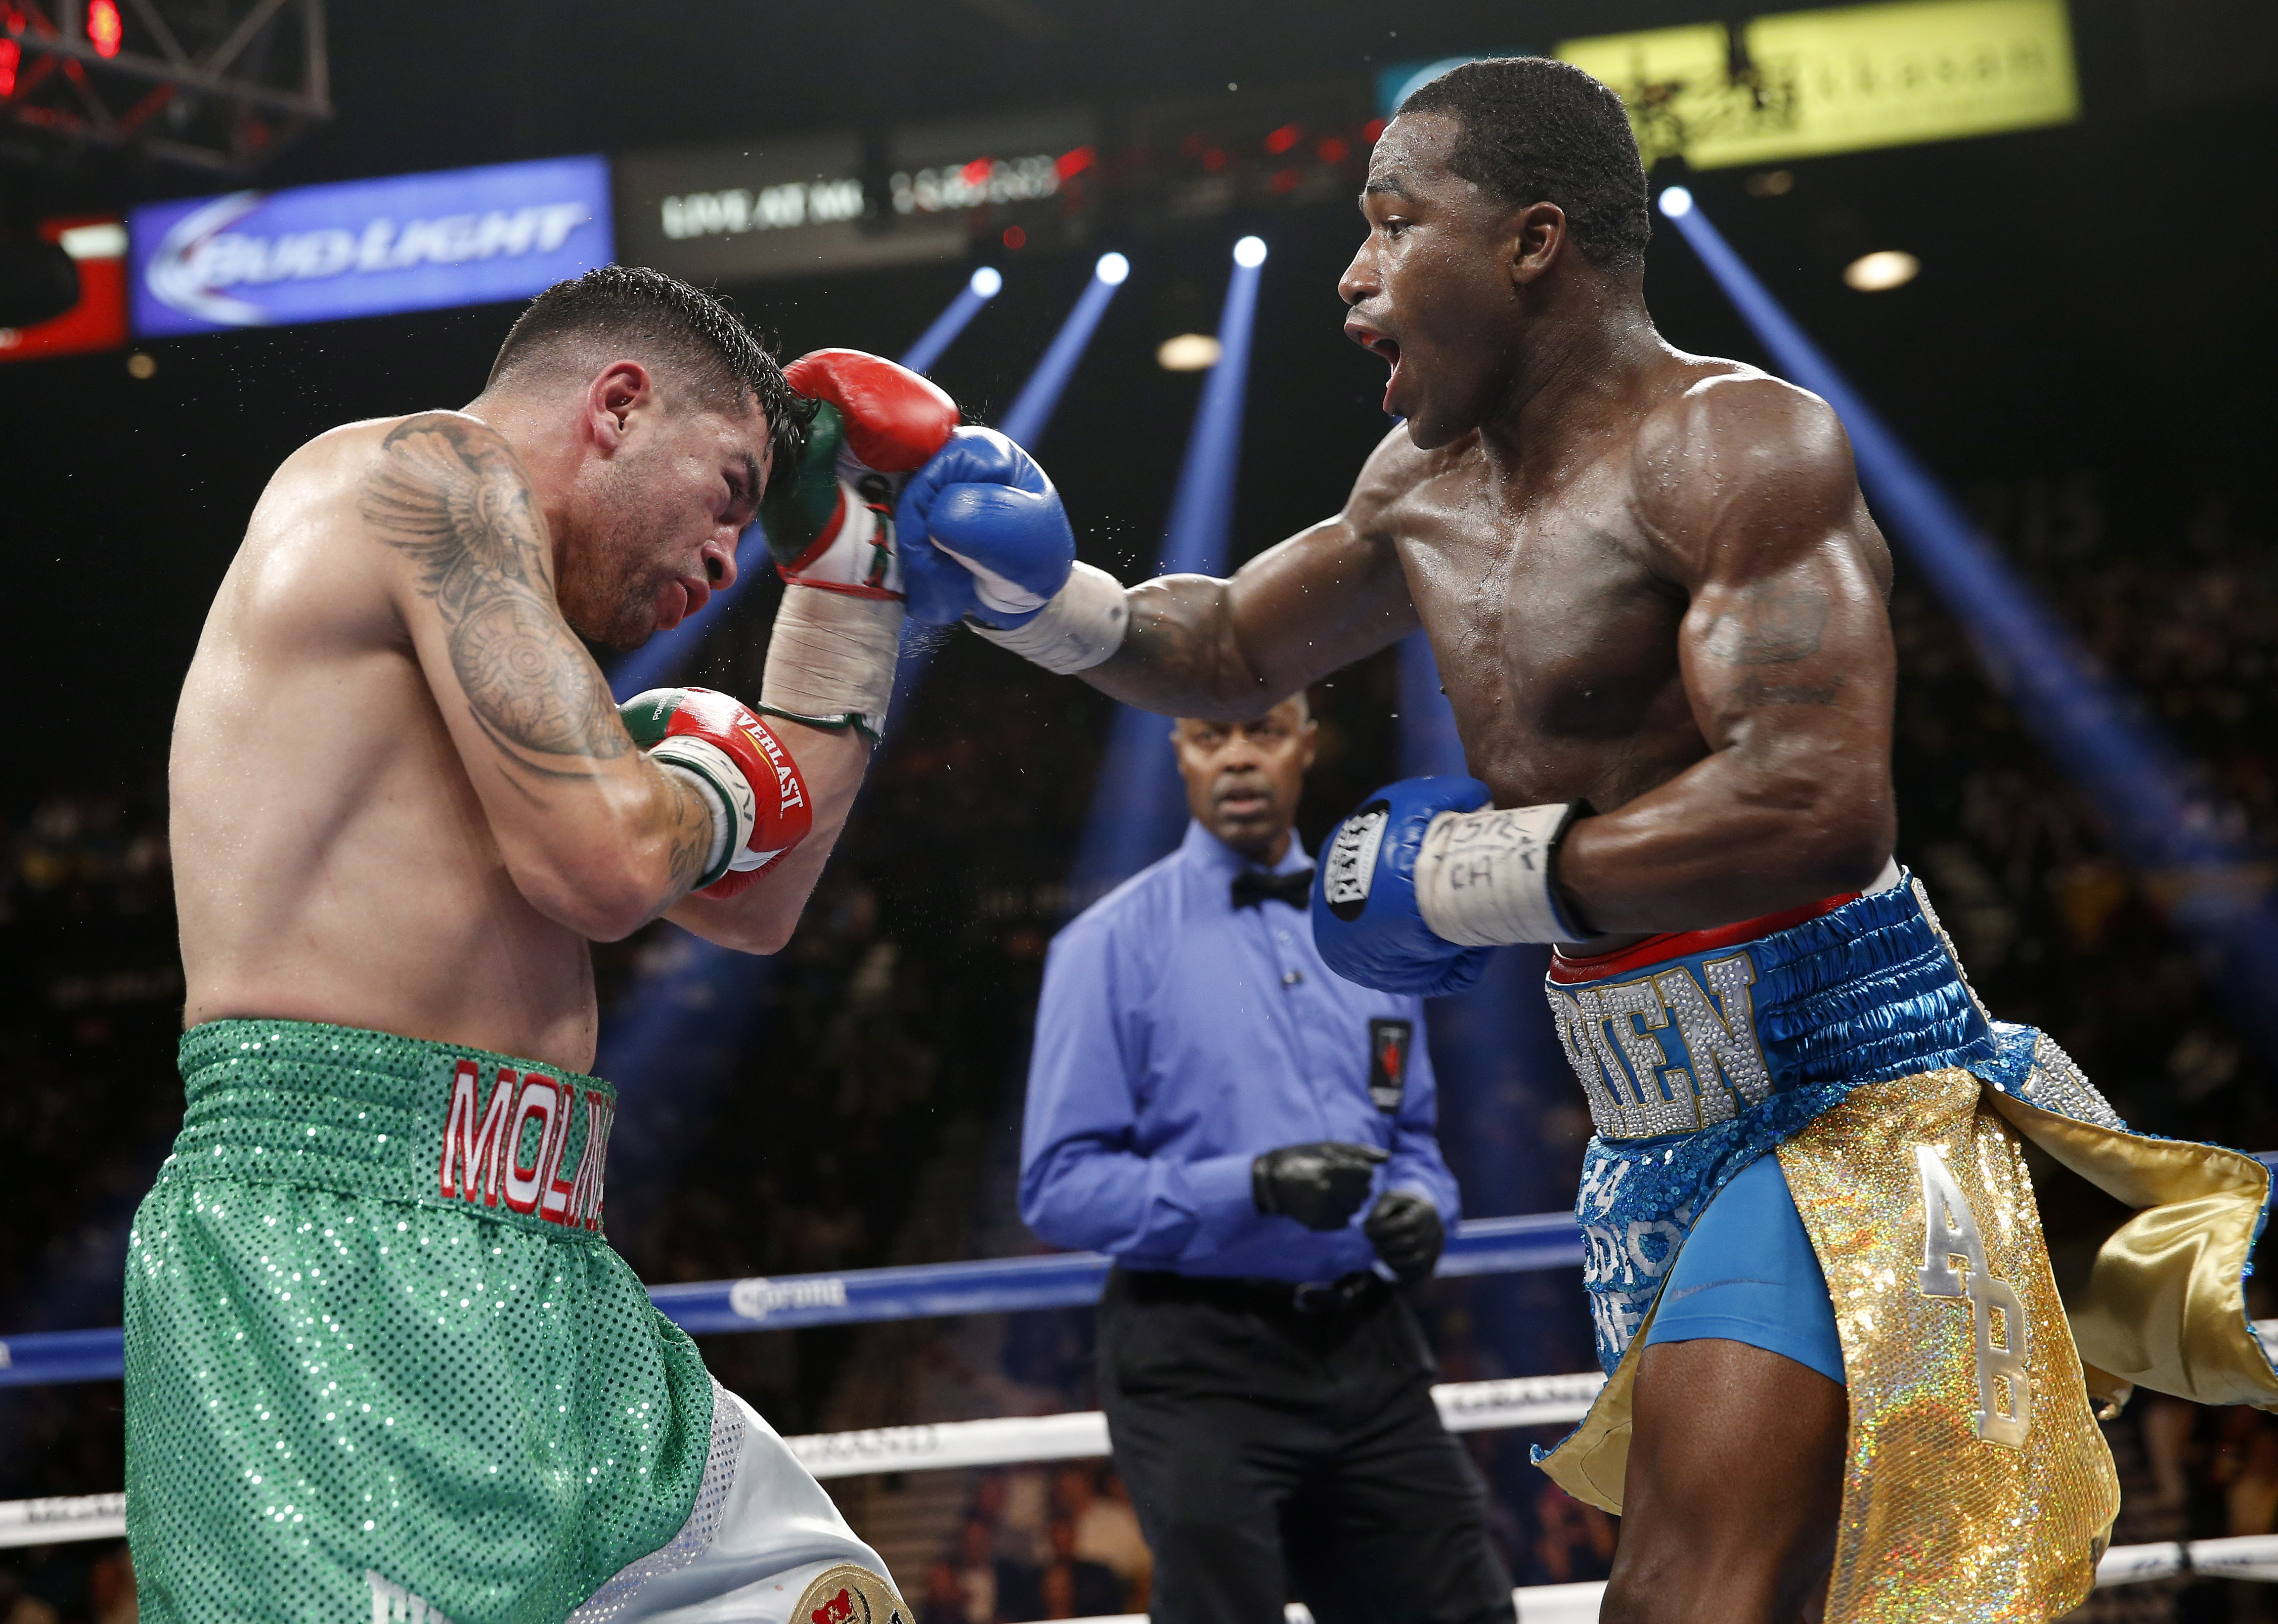 Adrien Broner came under fire after saying he "beat the [expletive...